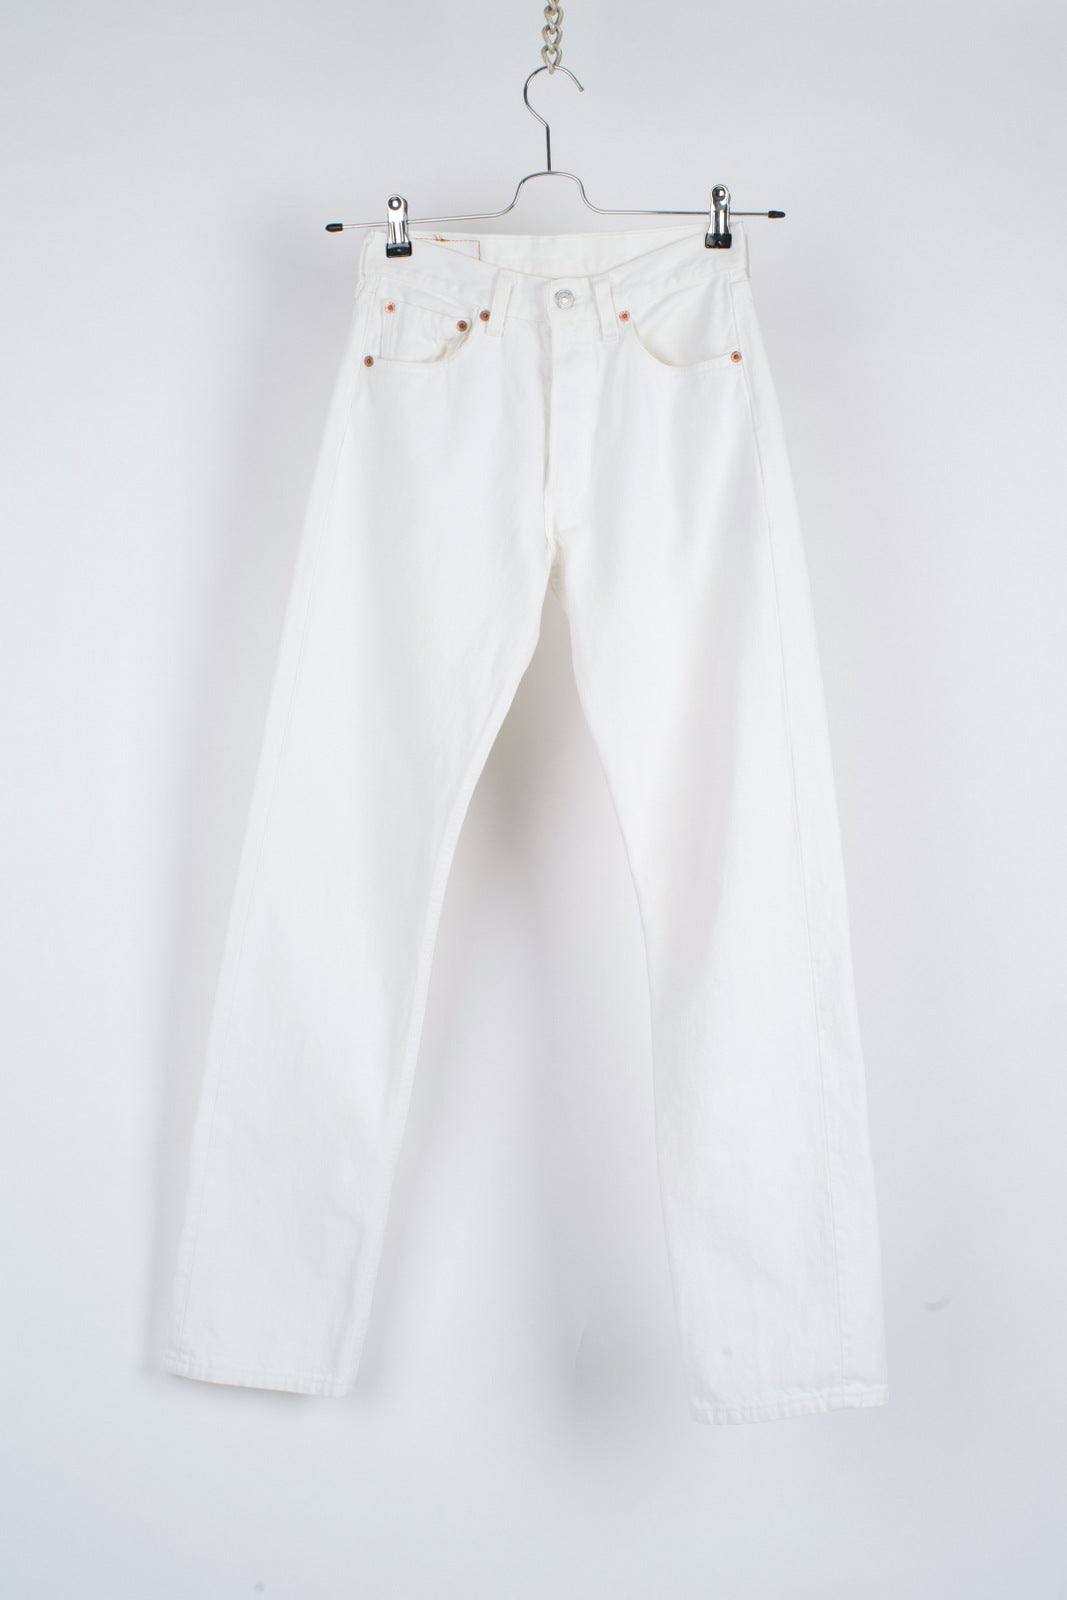 Levi’s 501 Vintage White Jeans Made in USA, W27/L32